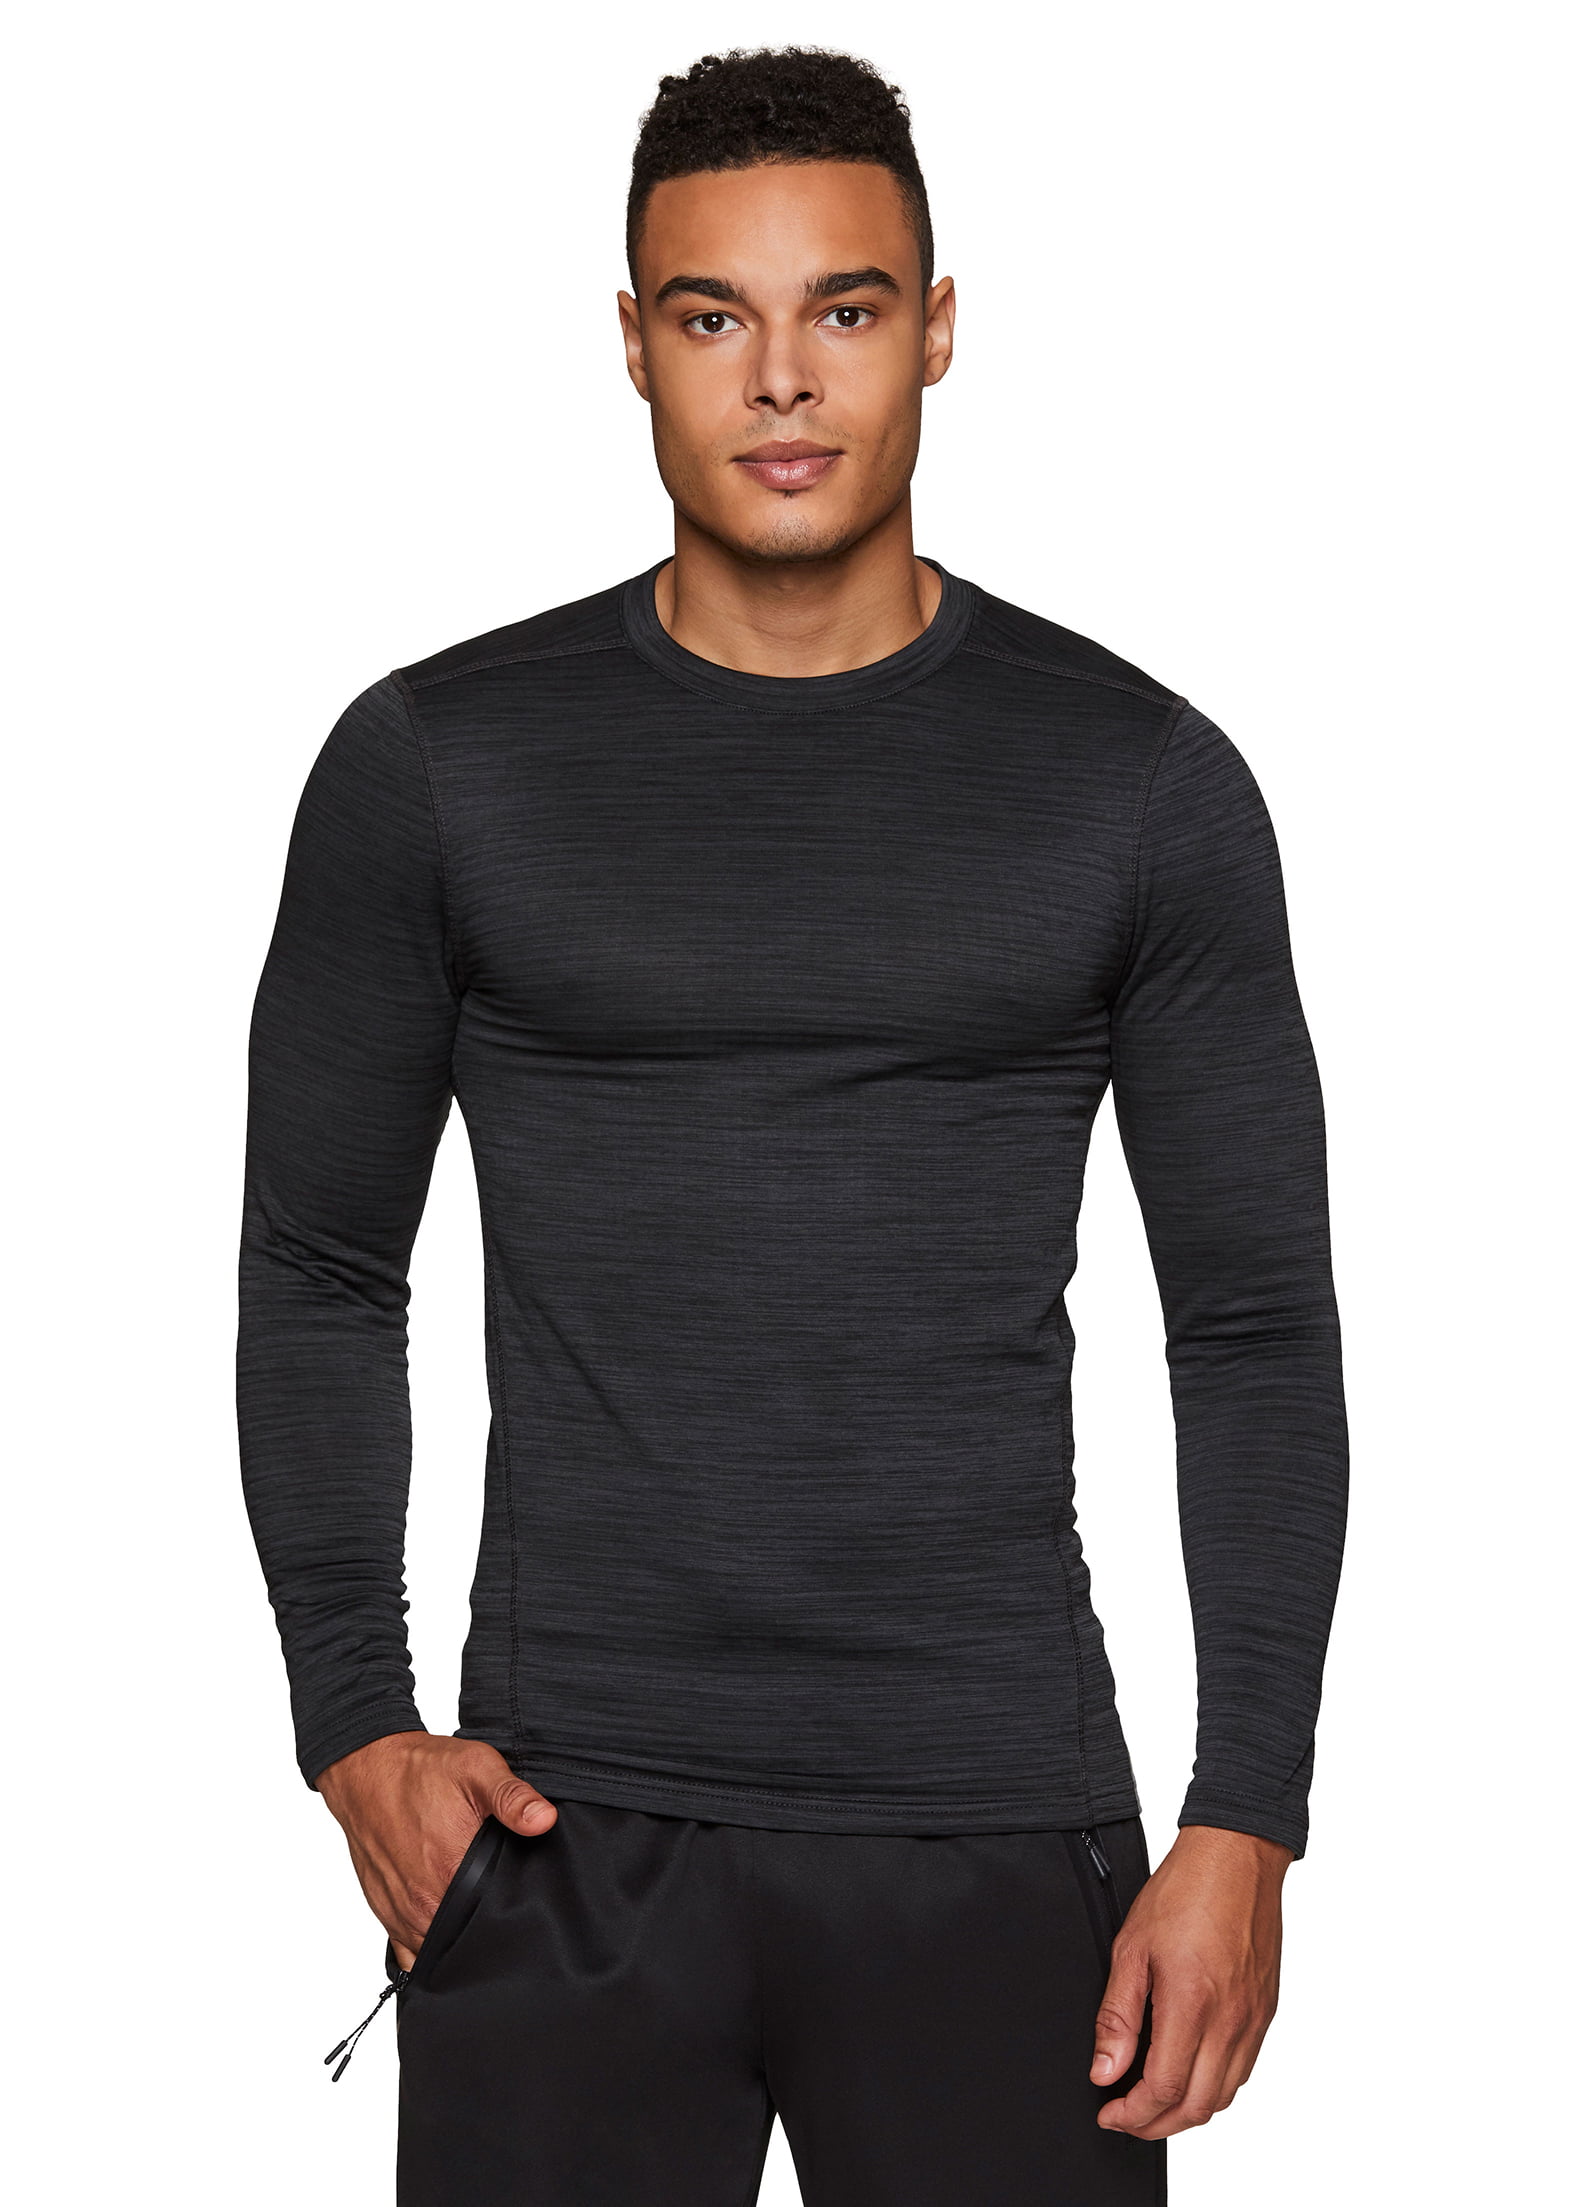 RBX Sport Performance Mens Long Sleeve Base Layer Top M Medium Black Thermal for sale online 